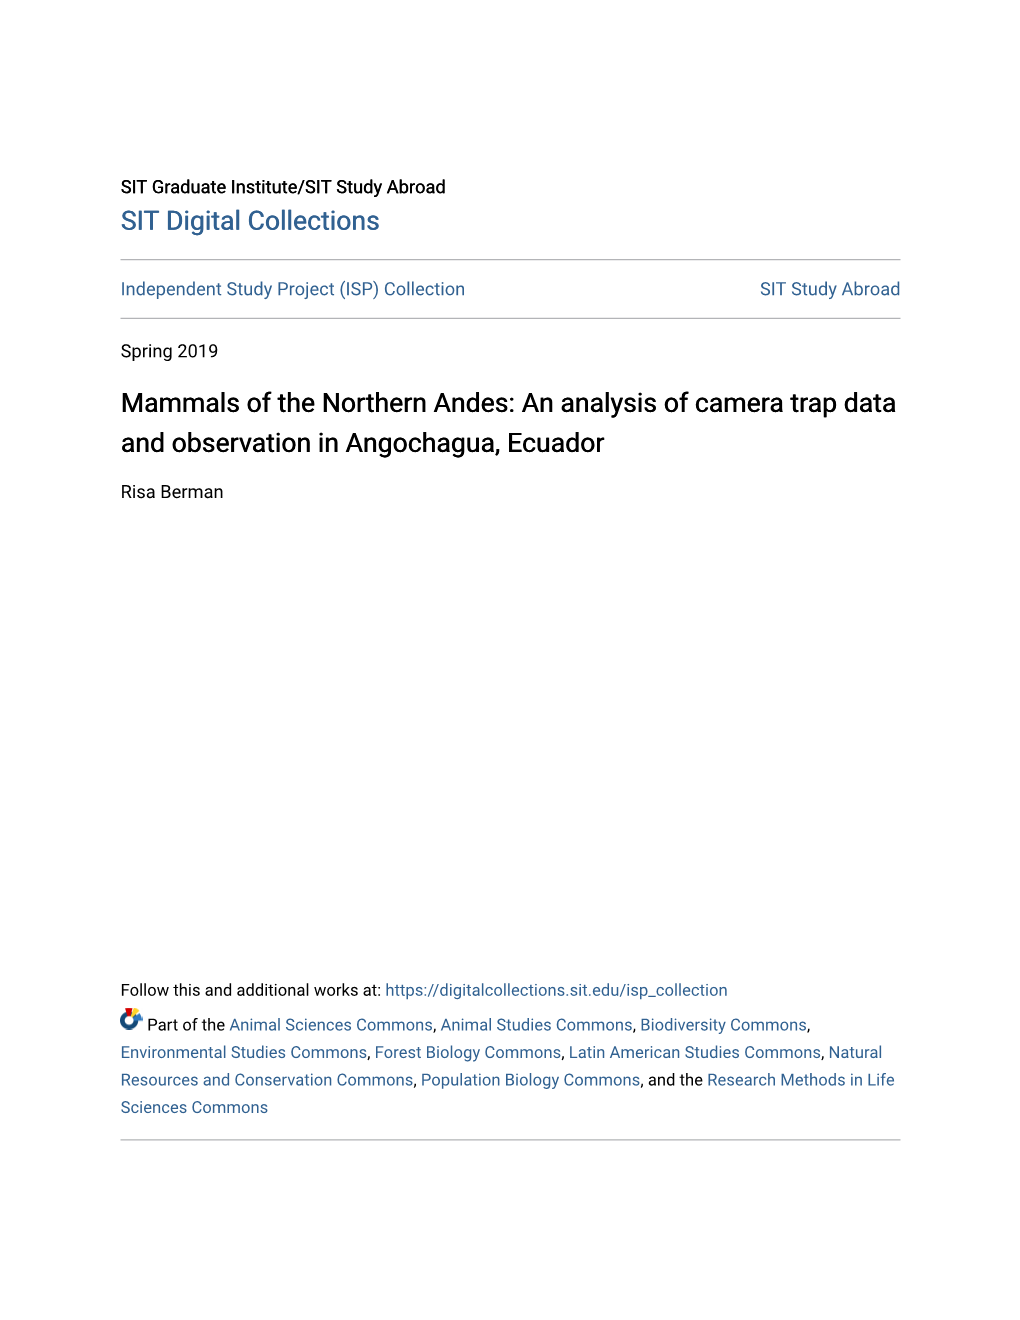 Mammals of the Northern Andes: an Analysis of Camera Trap Data and Observation in Angochagua, Ecuador